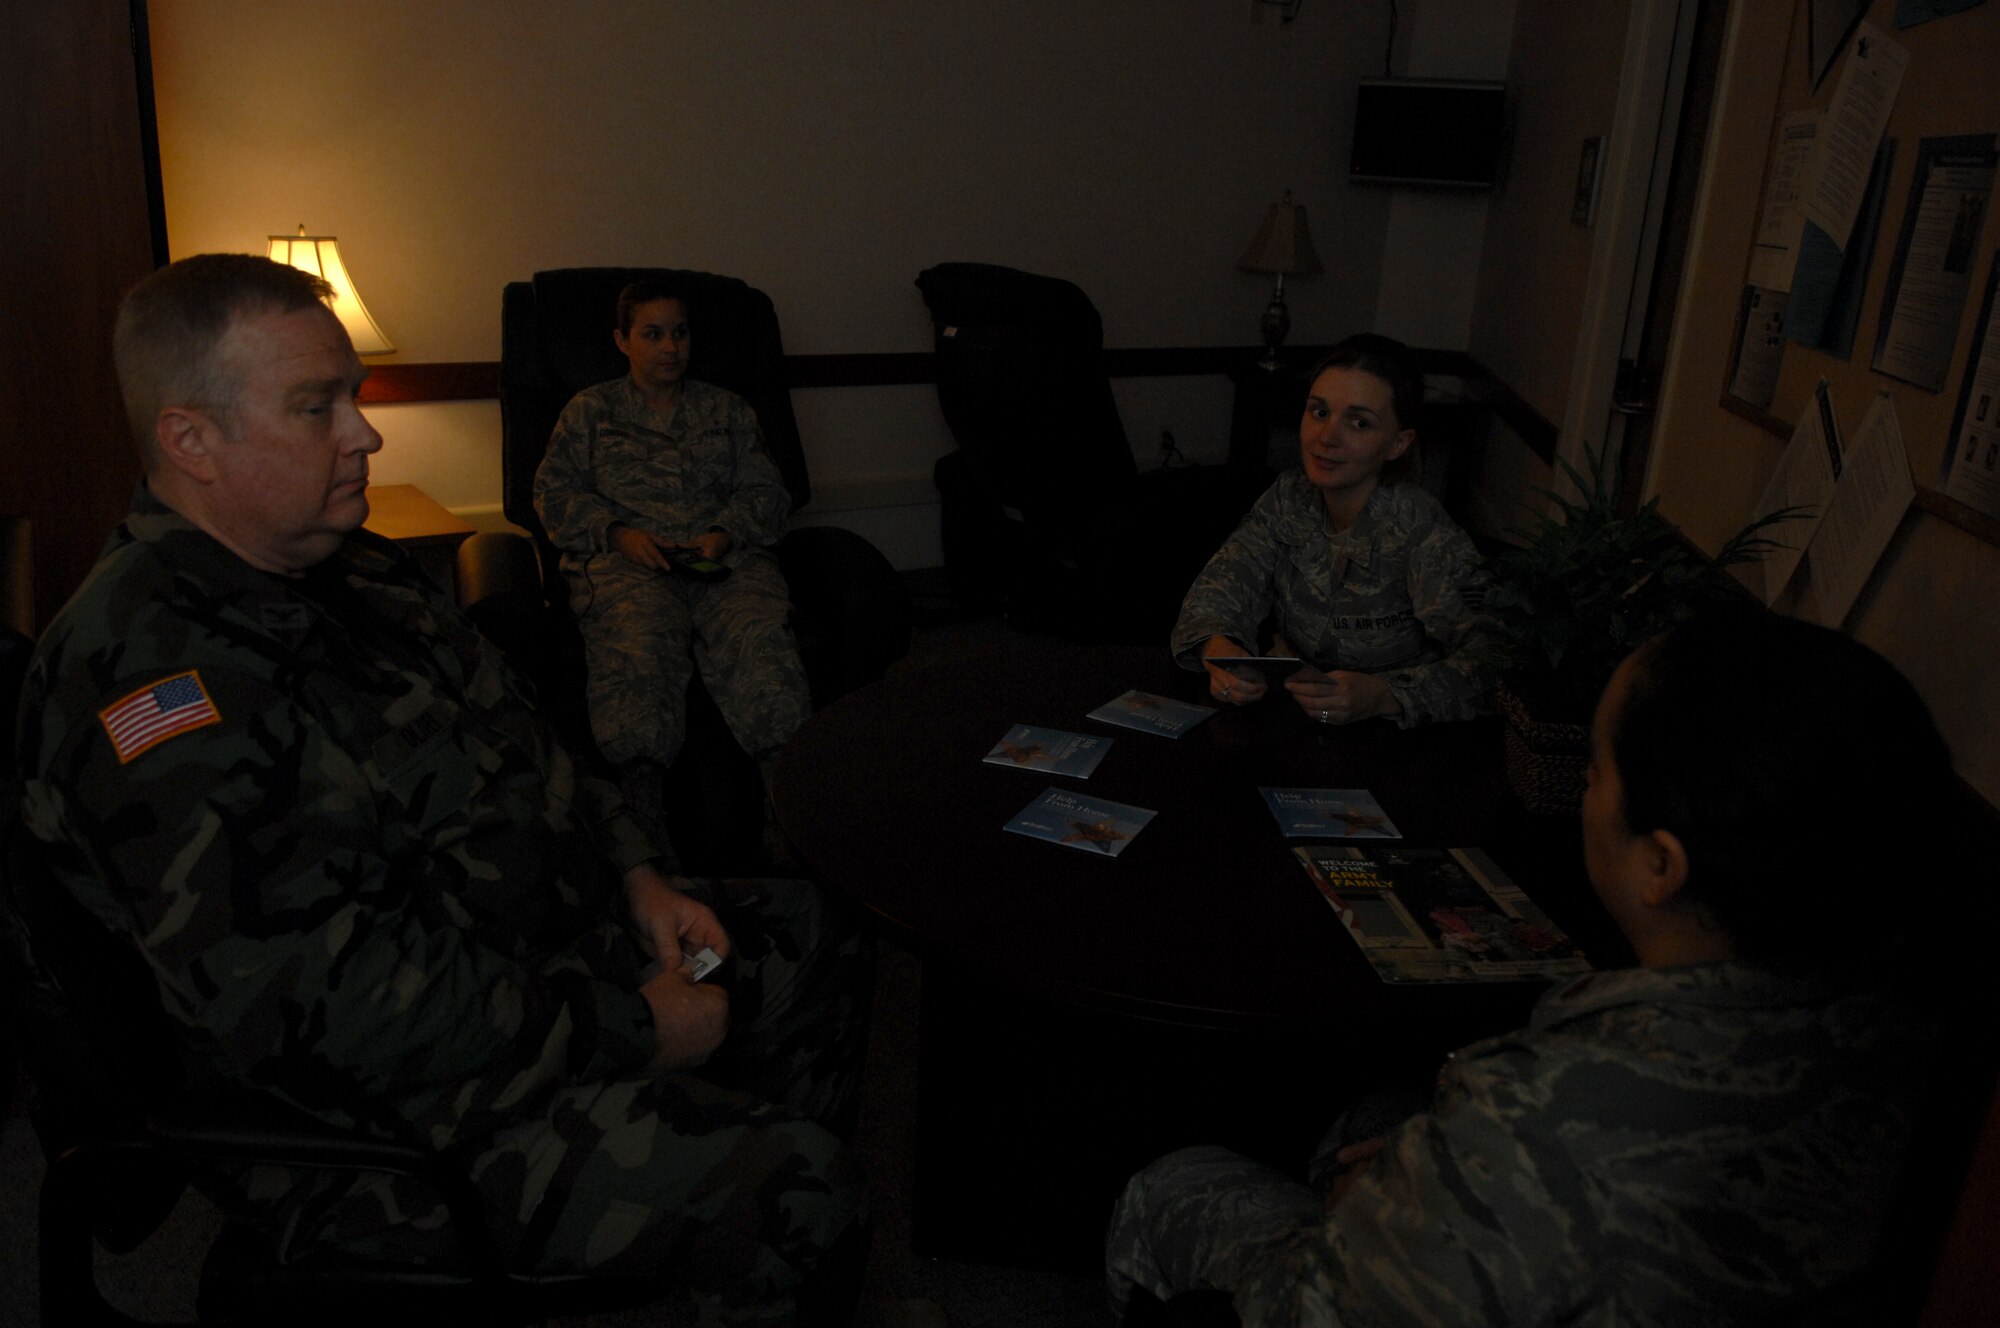 JOINT BASE ELMENDORF-RICHARDSON, Alaska -- Members of the 3rd Medical Group, Mental Health Flight, sit for a discussion in the Tramatic Brain Clinic waiting room. The TBI clinic waiting room is dimly lit to reduce stress from light sensitivity that many patients with TBI have. Mental Health deals with any mental health issue working with most Air Force organizations. (Air Force photo by Airman 1st Class Jack Sanders)